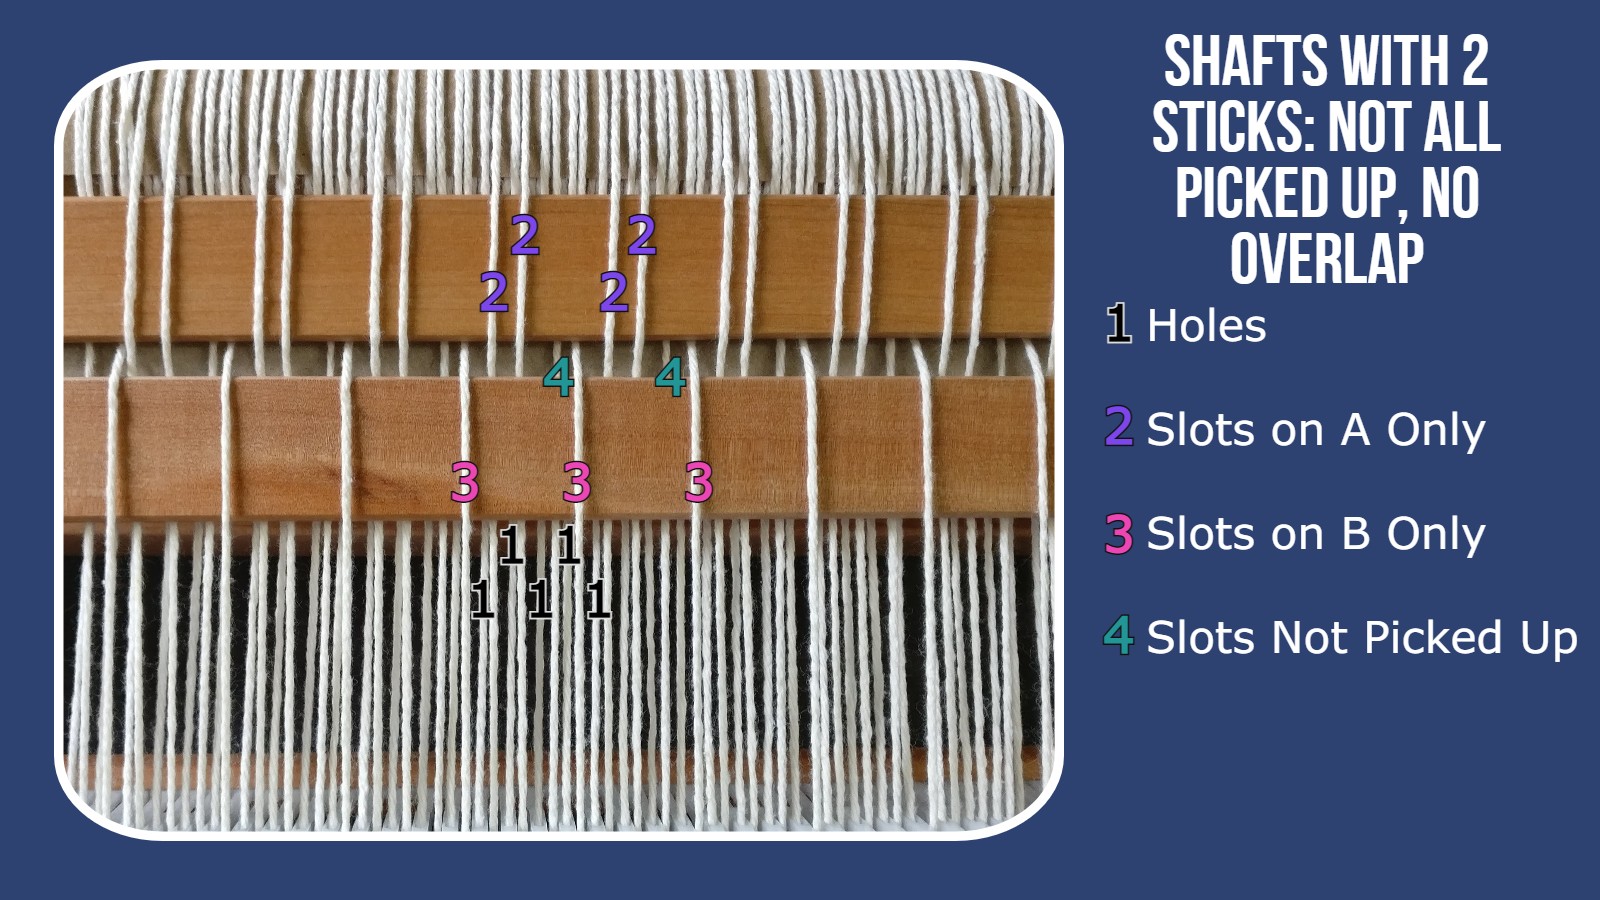 2 stick pick up to shaft illustration: different patterns where all yarns are picked up, no overlap